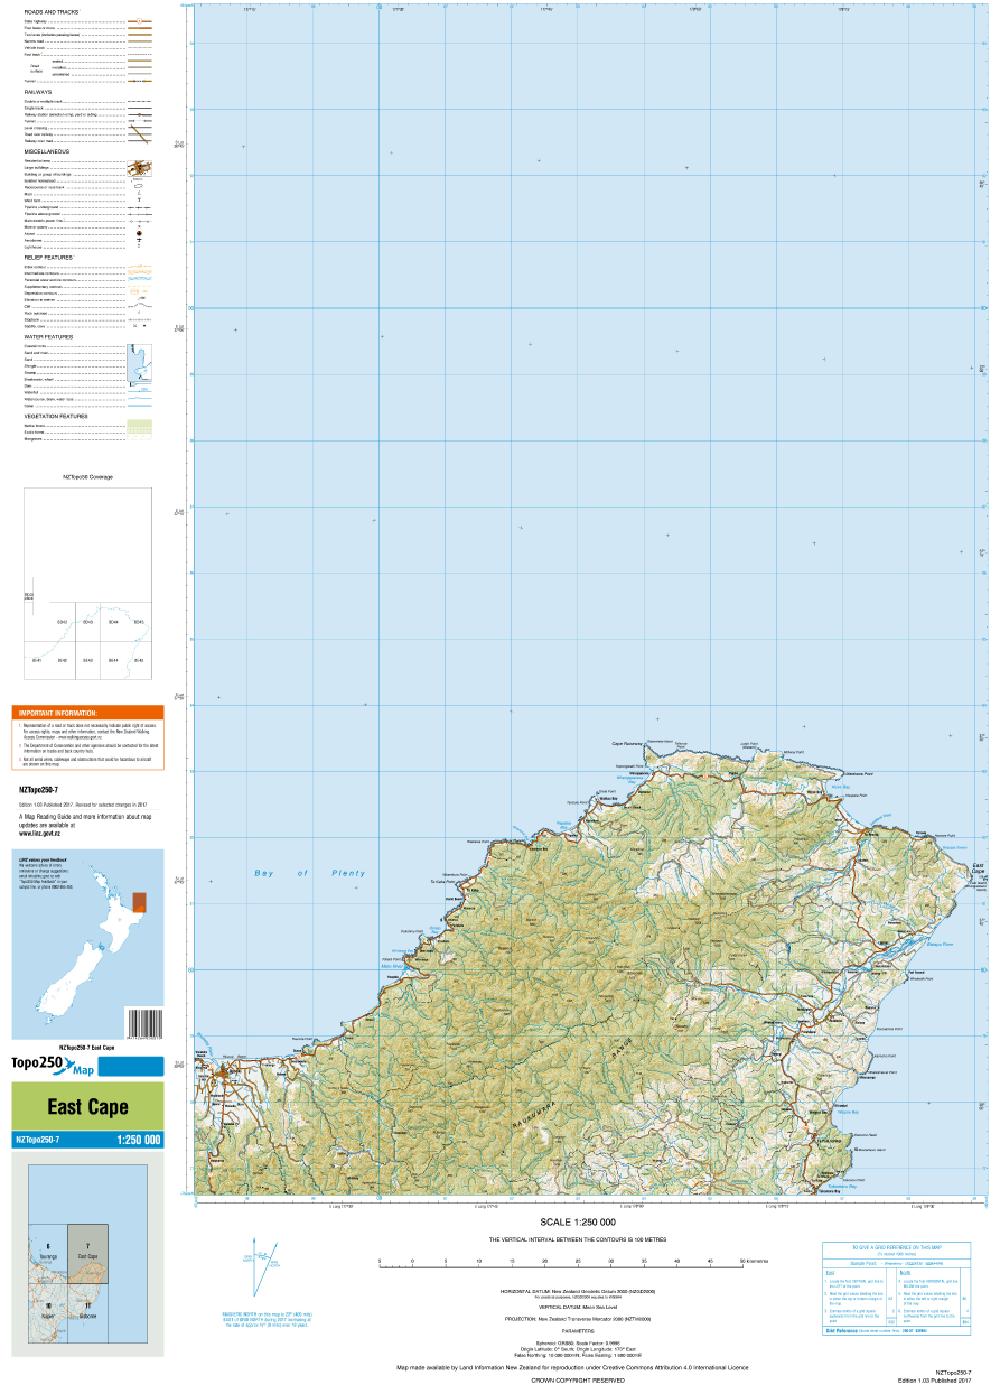 Topo map of East Cape